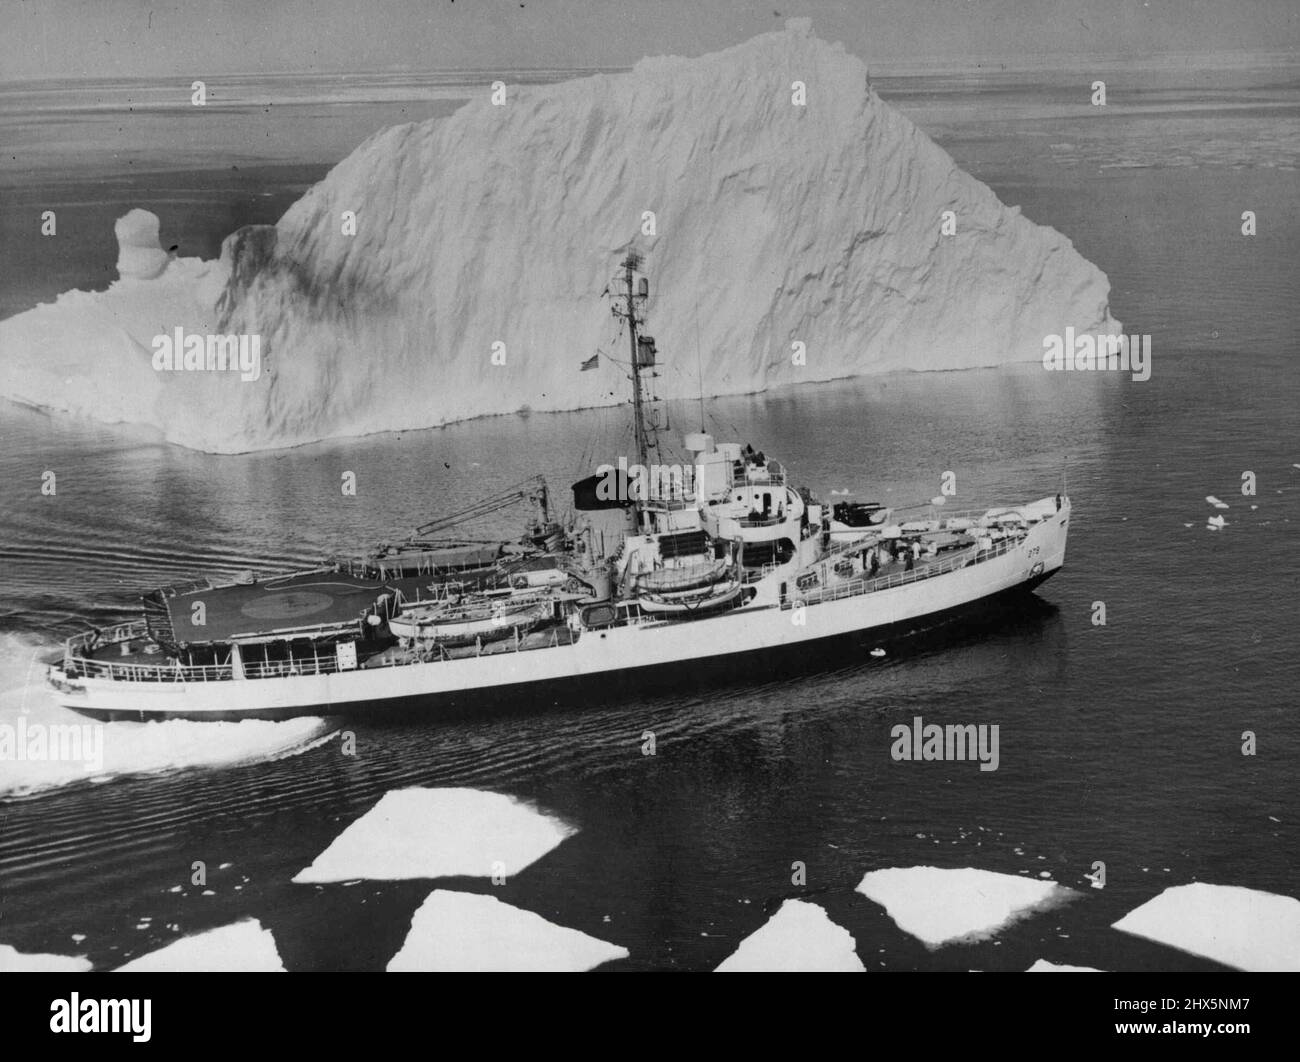 Greenland Cosmic Ray Scientific Expedition By The U.S. Office of Naval Research -- During the summer months of August and September 1952, the U.S. Office of Navel Research carried out a series of high altitude cosmic ray investigations in the vicinity of the *****. The United States Coastguard cutter 'Eastwind' with its 'postage stamp' flight deck (60 feet in diameter) from which balloons measuring up to 180 feet were launched, nosing bar way through the ice in the region where the balloons ware sent up. November 20, 1952. Stock Photo